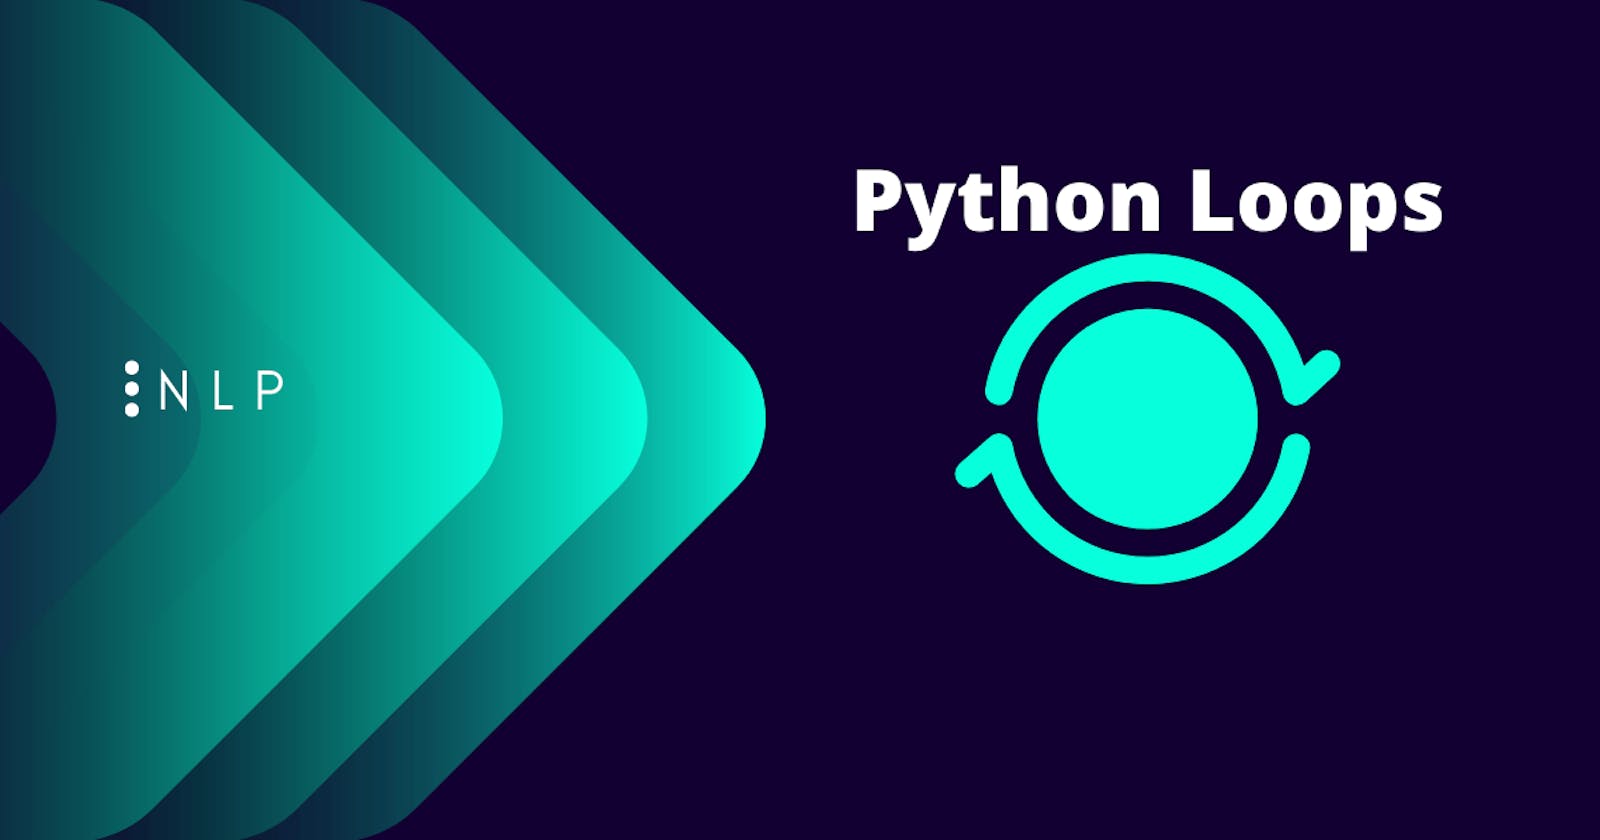 Python Loops and the infamous FizzBuzz